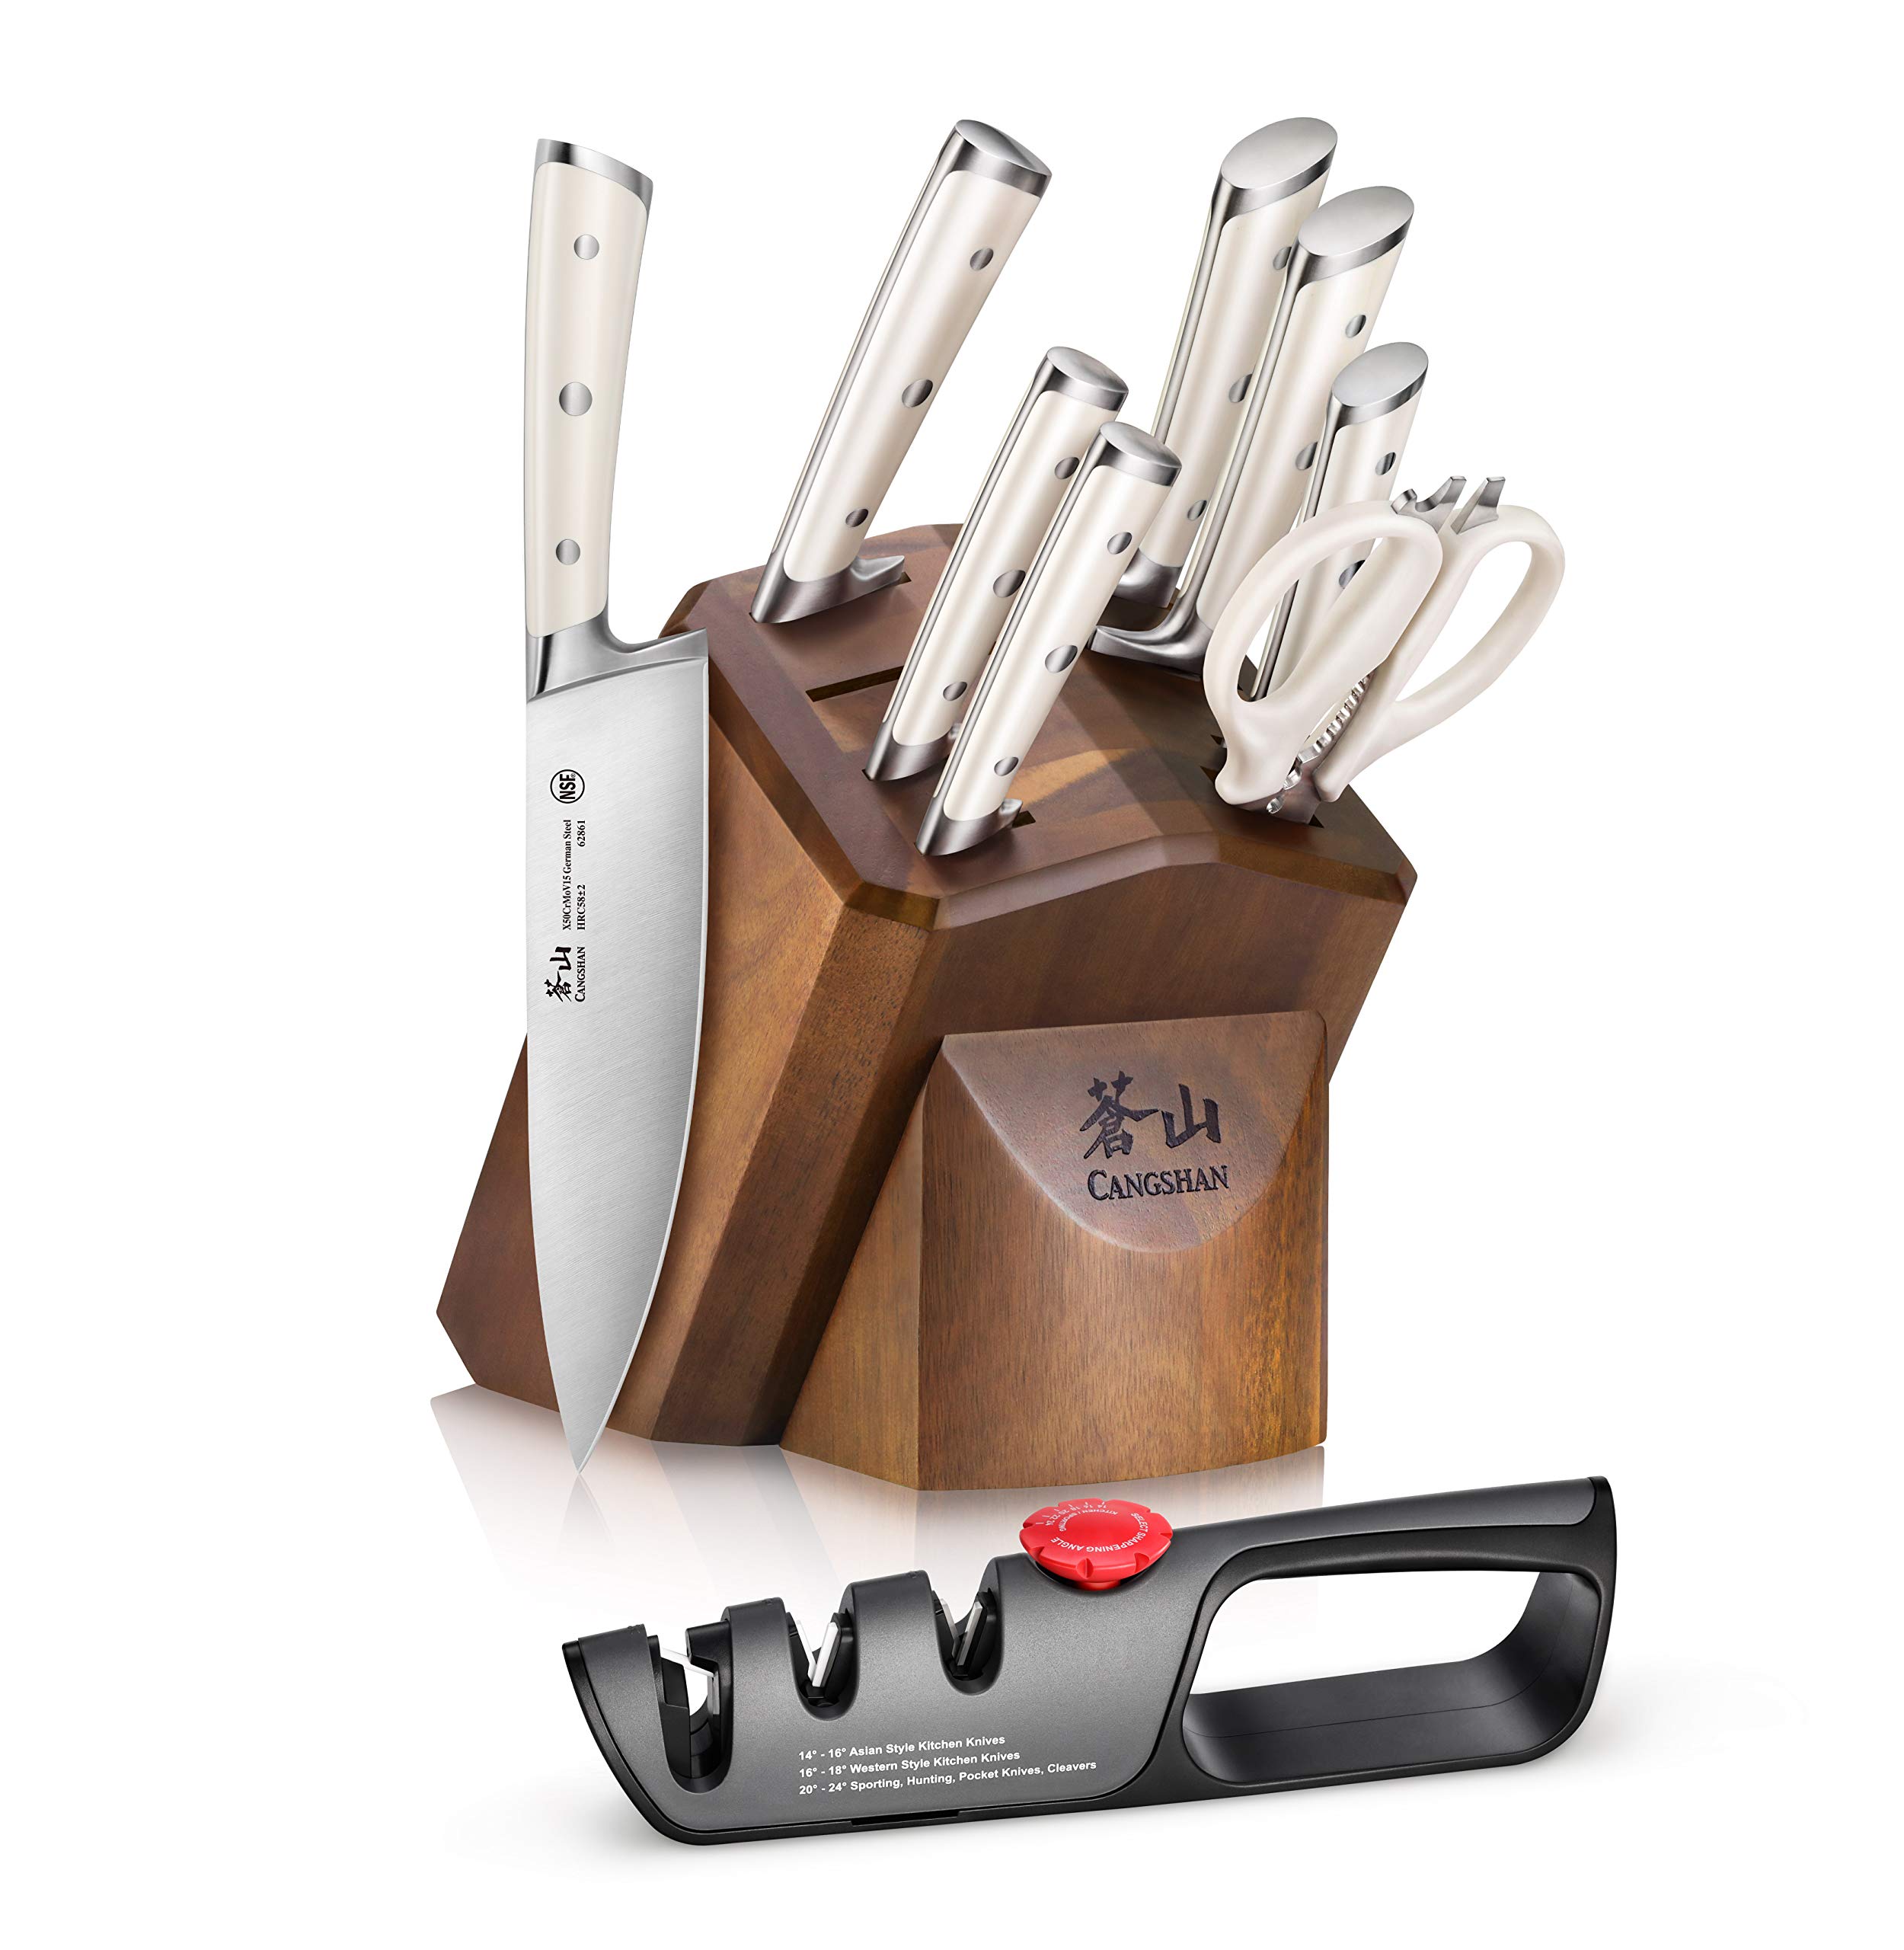 10-Piece Cangshan H1 Forged Knife Block Set $80 + free s/h